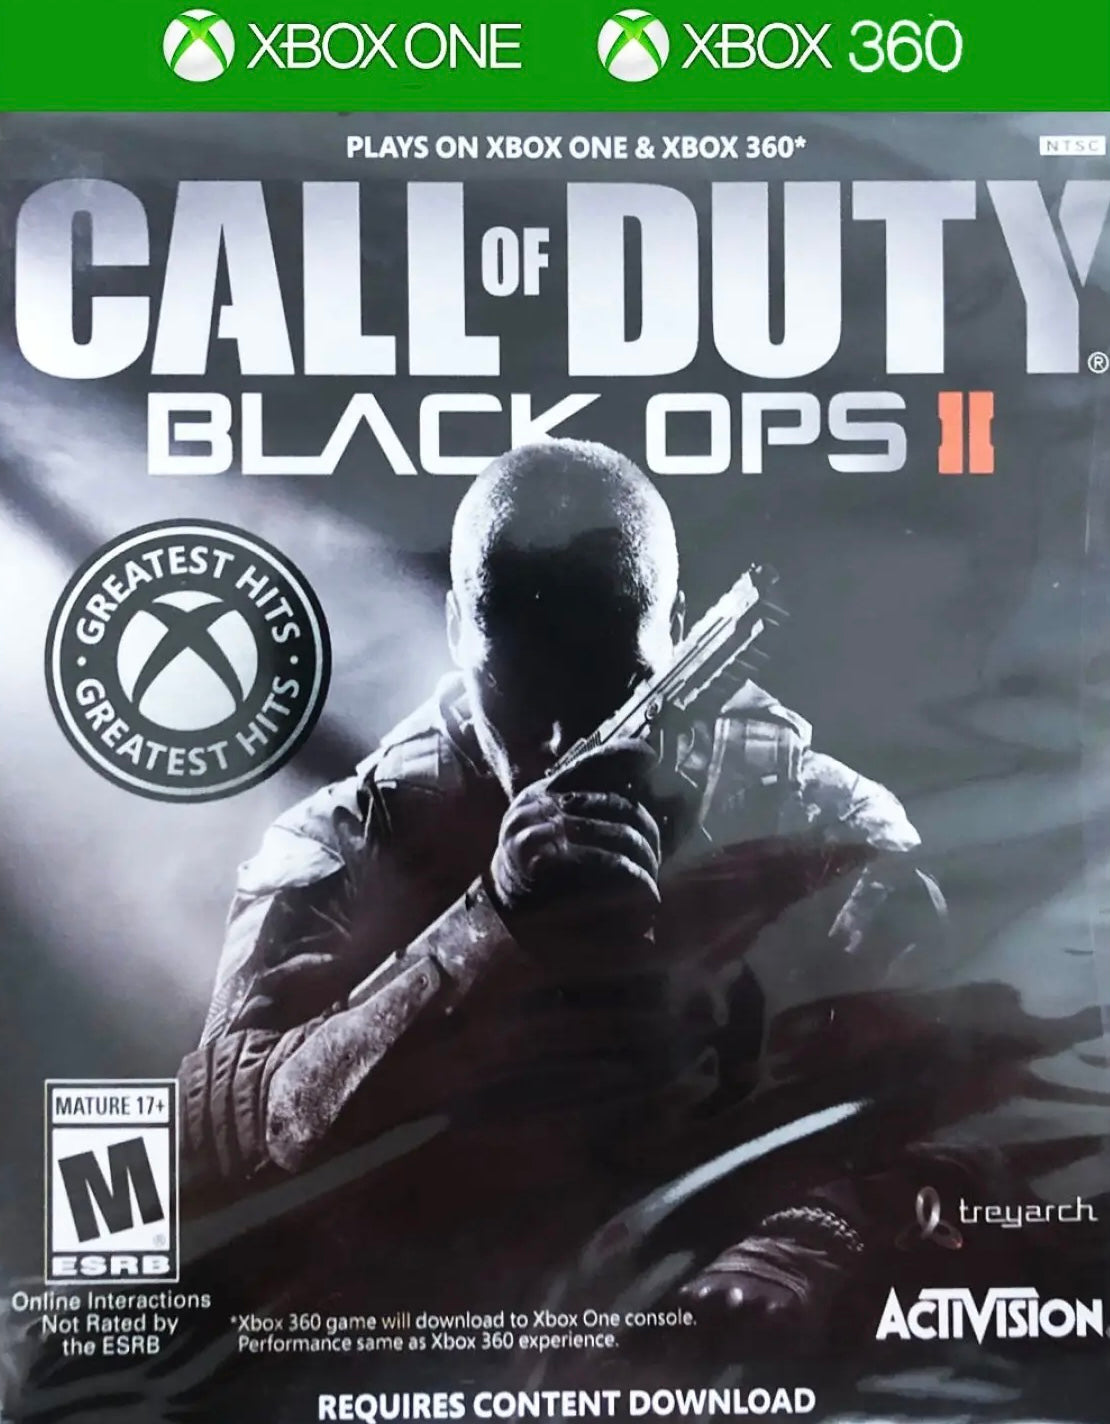 BO2] Black Ops 2 is on sale for XBOX for only 14.99. If you're